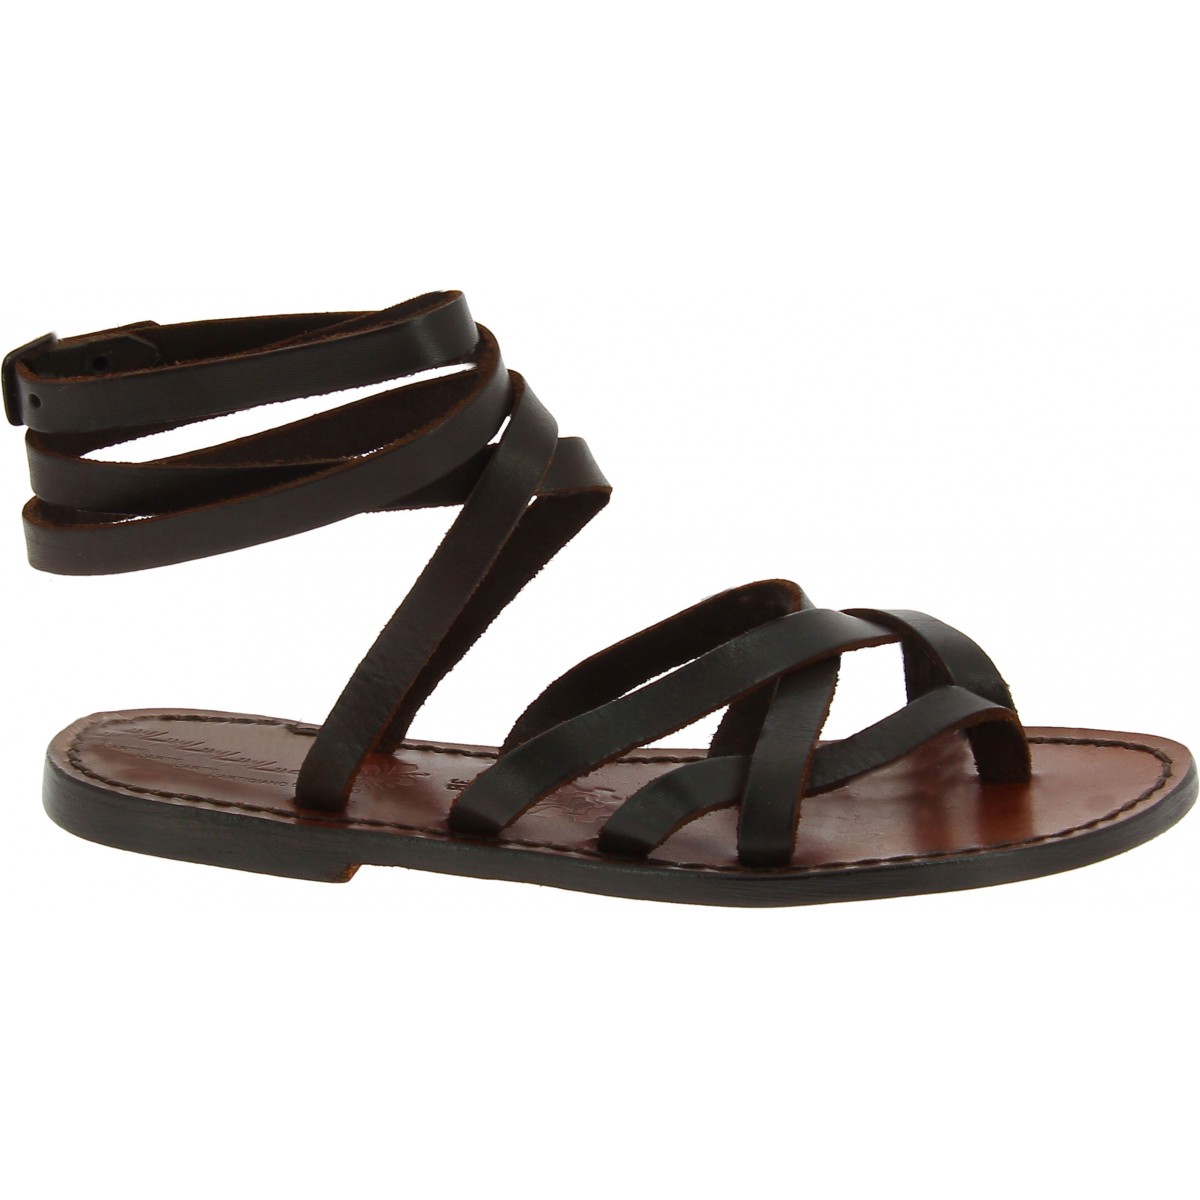 Women's dark brown leather strappy sandals handmade in Italy | The ...